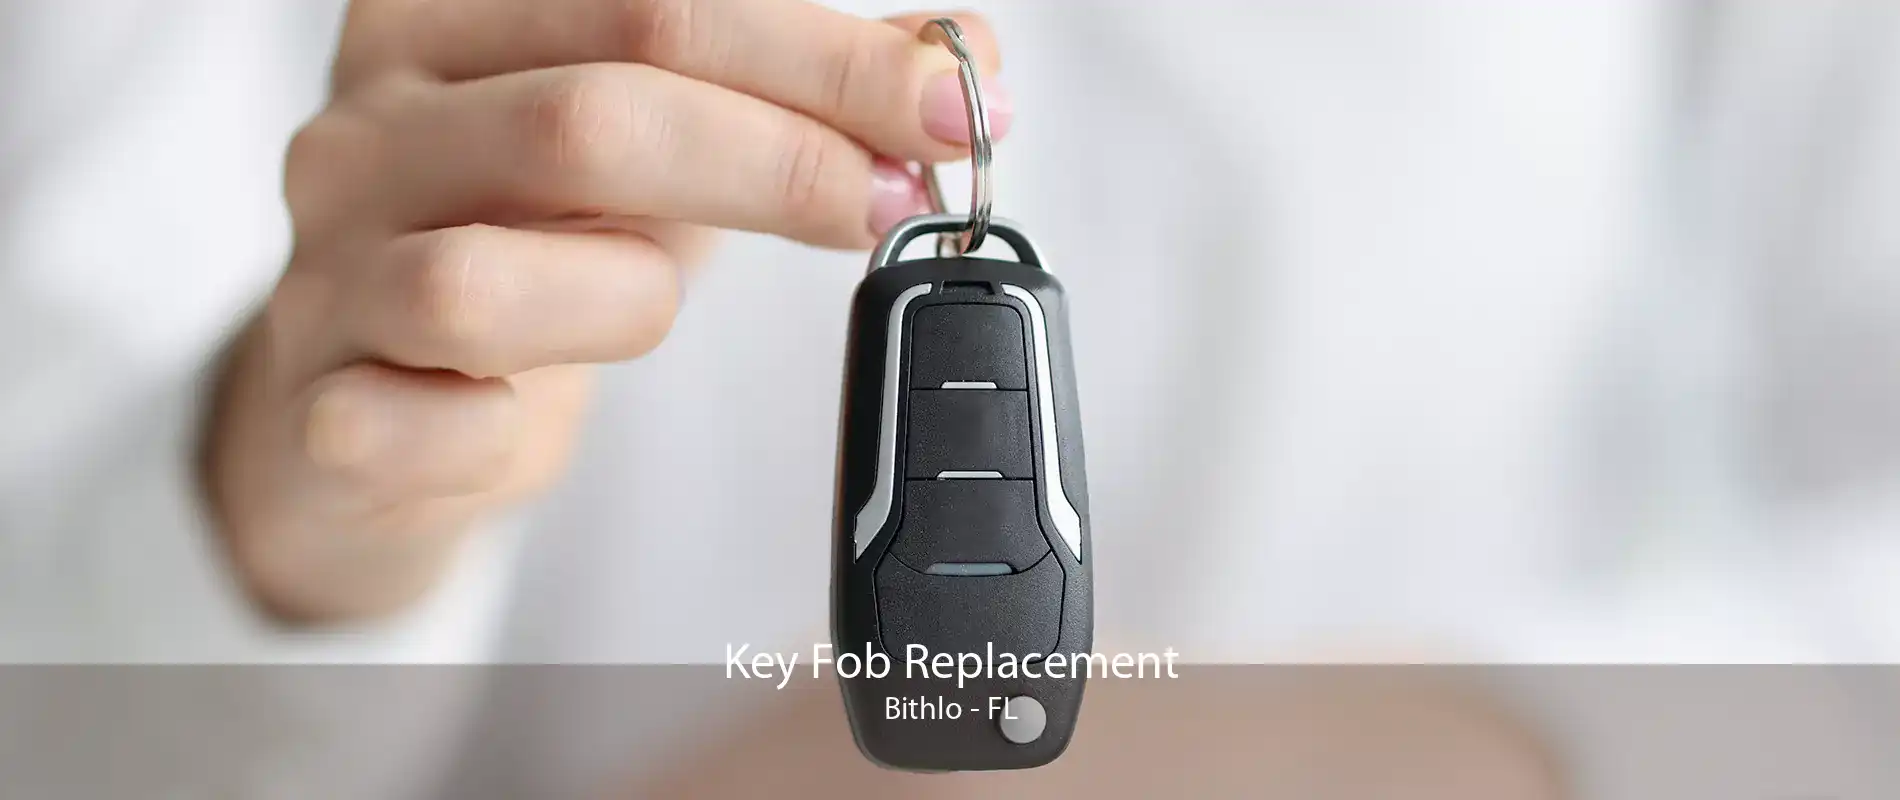 Key Fob Replacement Bithlo - FL